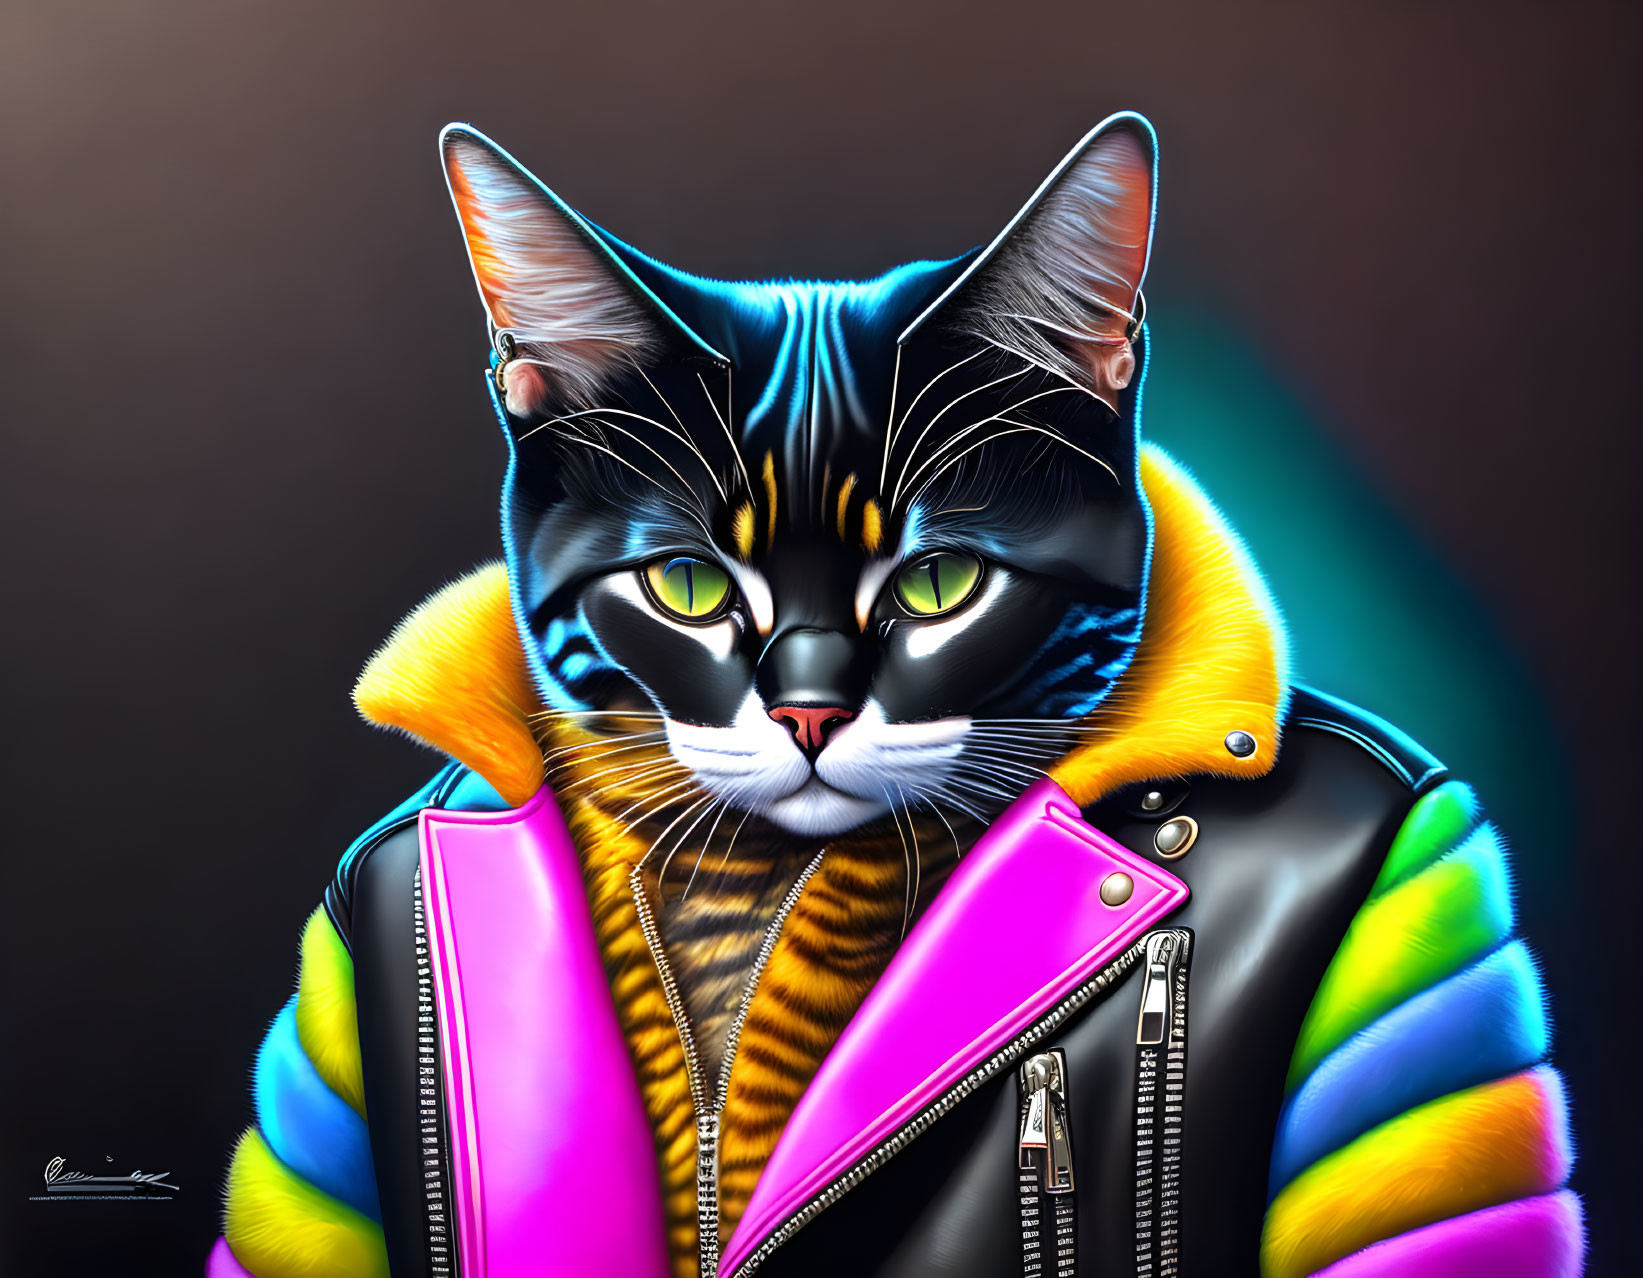 Digital Art: Cat with Human-Like Features in Colorful Jacket